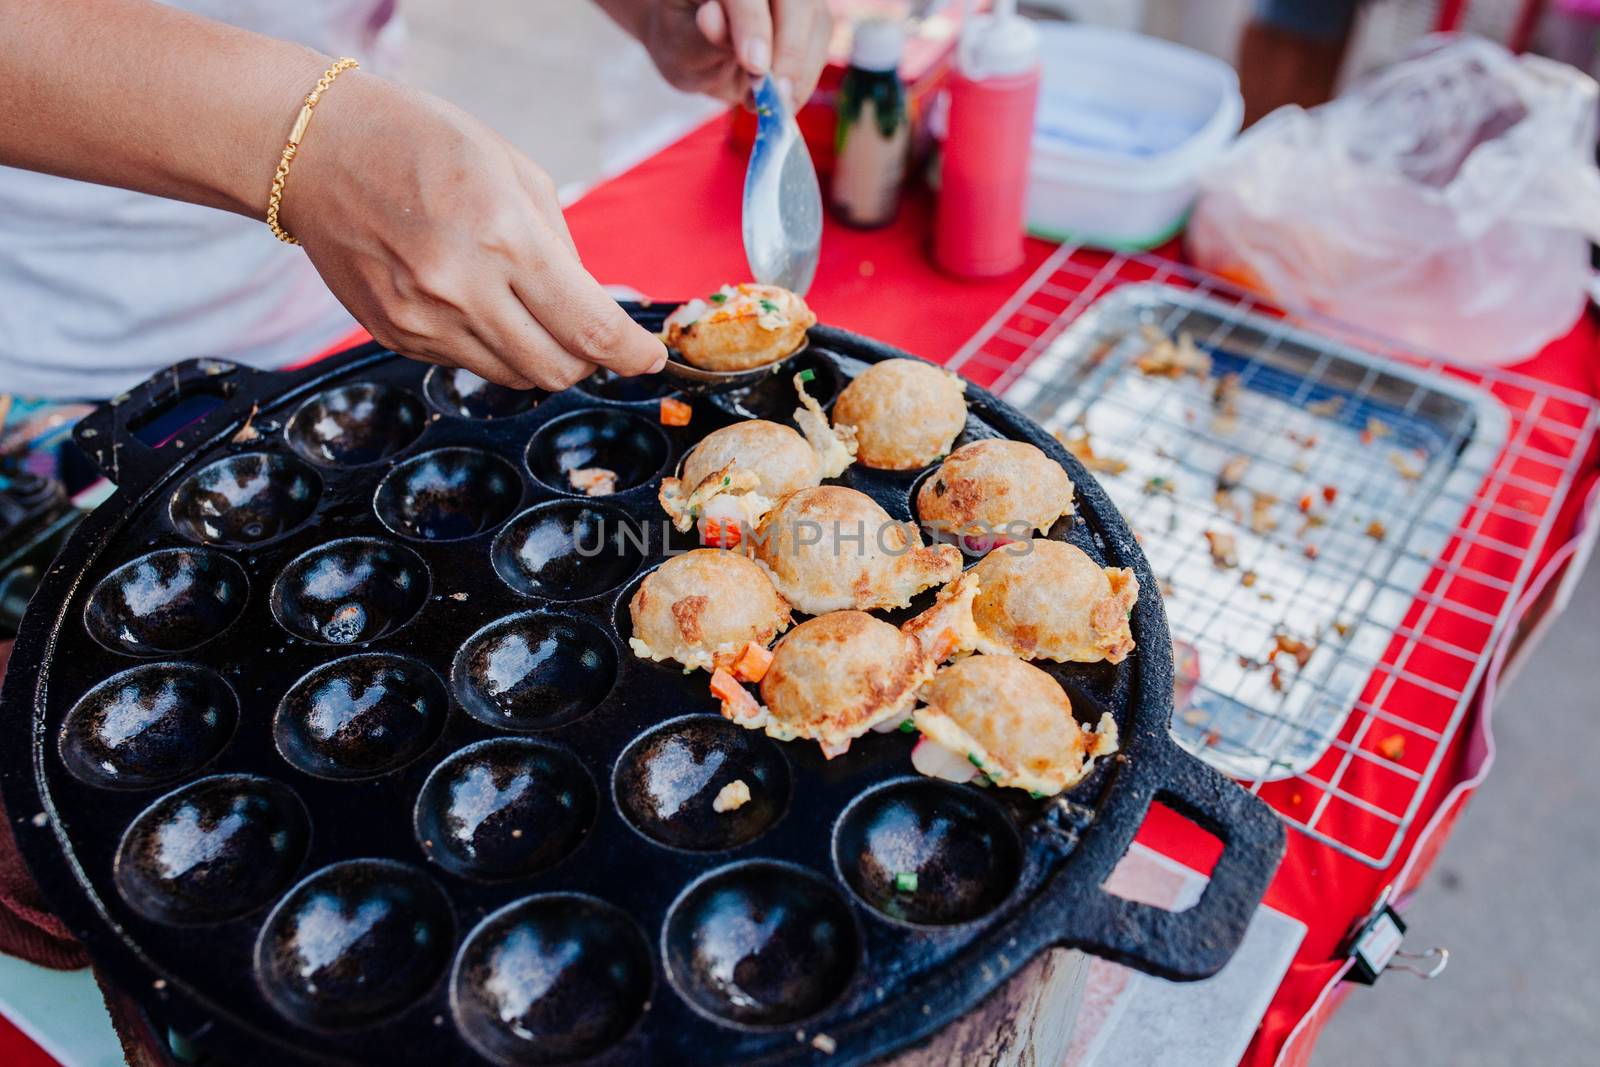 Sweet and Savory Grilled Coconut Rice Hot cakes it's for kanom krok
but sometiems they use Coconut Rice Cake